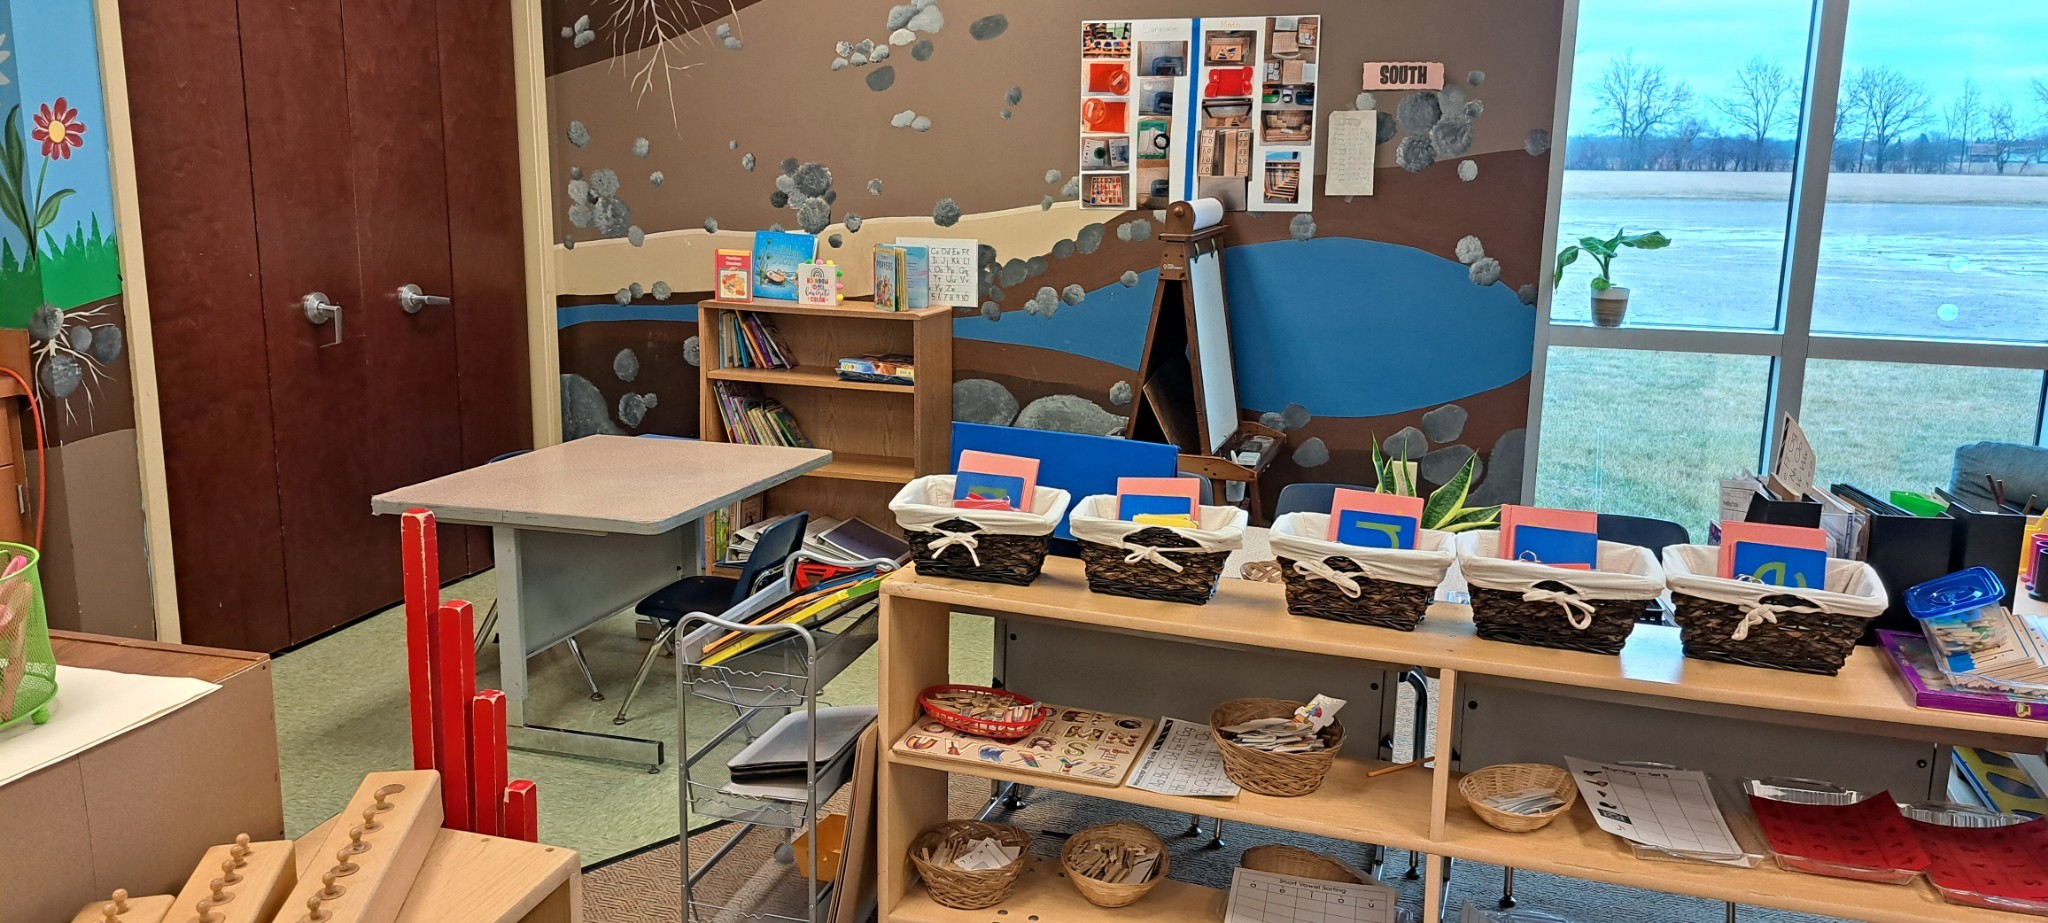 One corner of the classroom, with a few shelves, baskets, and books.